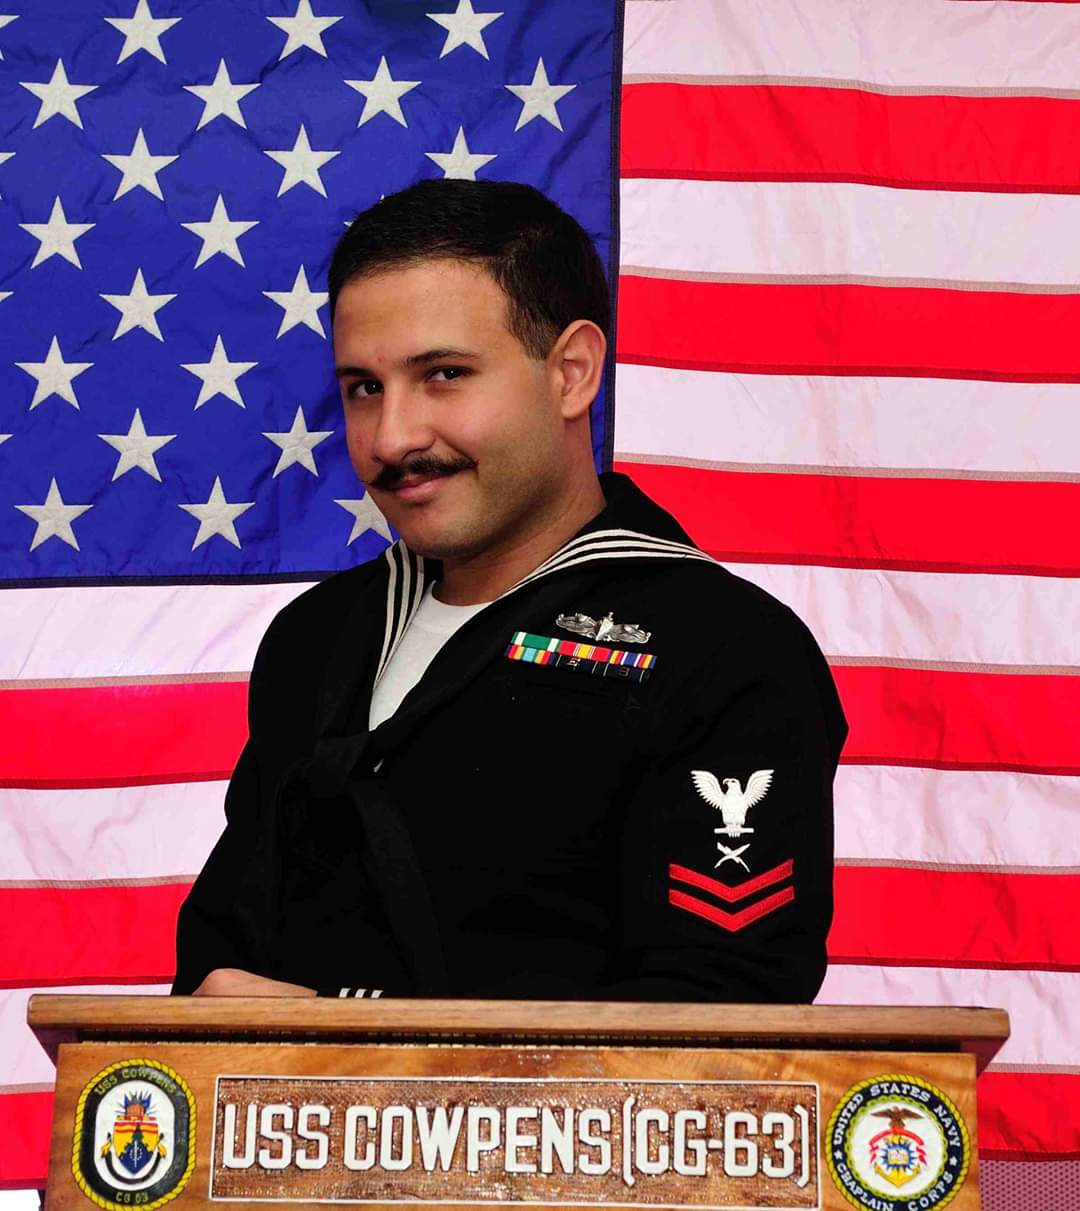 PHOTO: Photograph of veteran student Arturo Guerra in uniform while overseas. In the background of the picture you can see the American flag as well as Arturo Guerra leaning on a podium that reads USS COWPENS [CG-63]. Photo courtesy of Arturo Guerra.